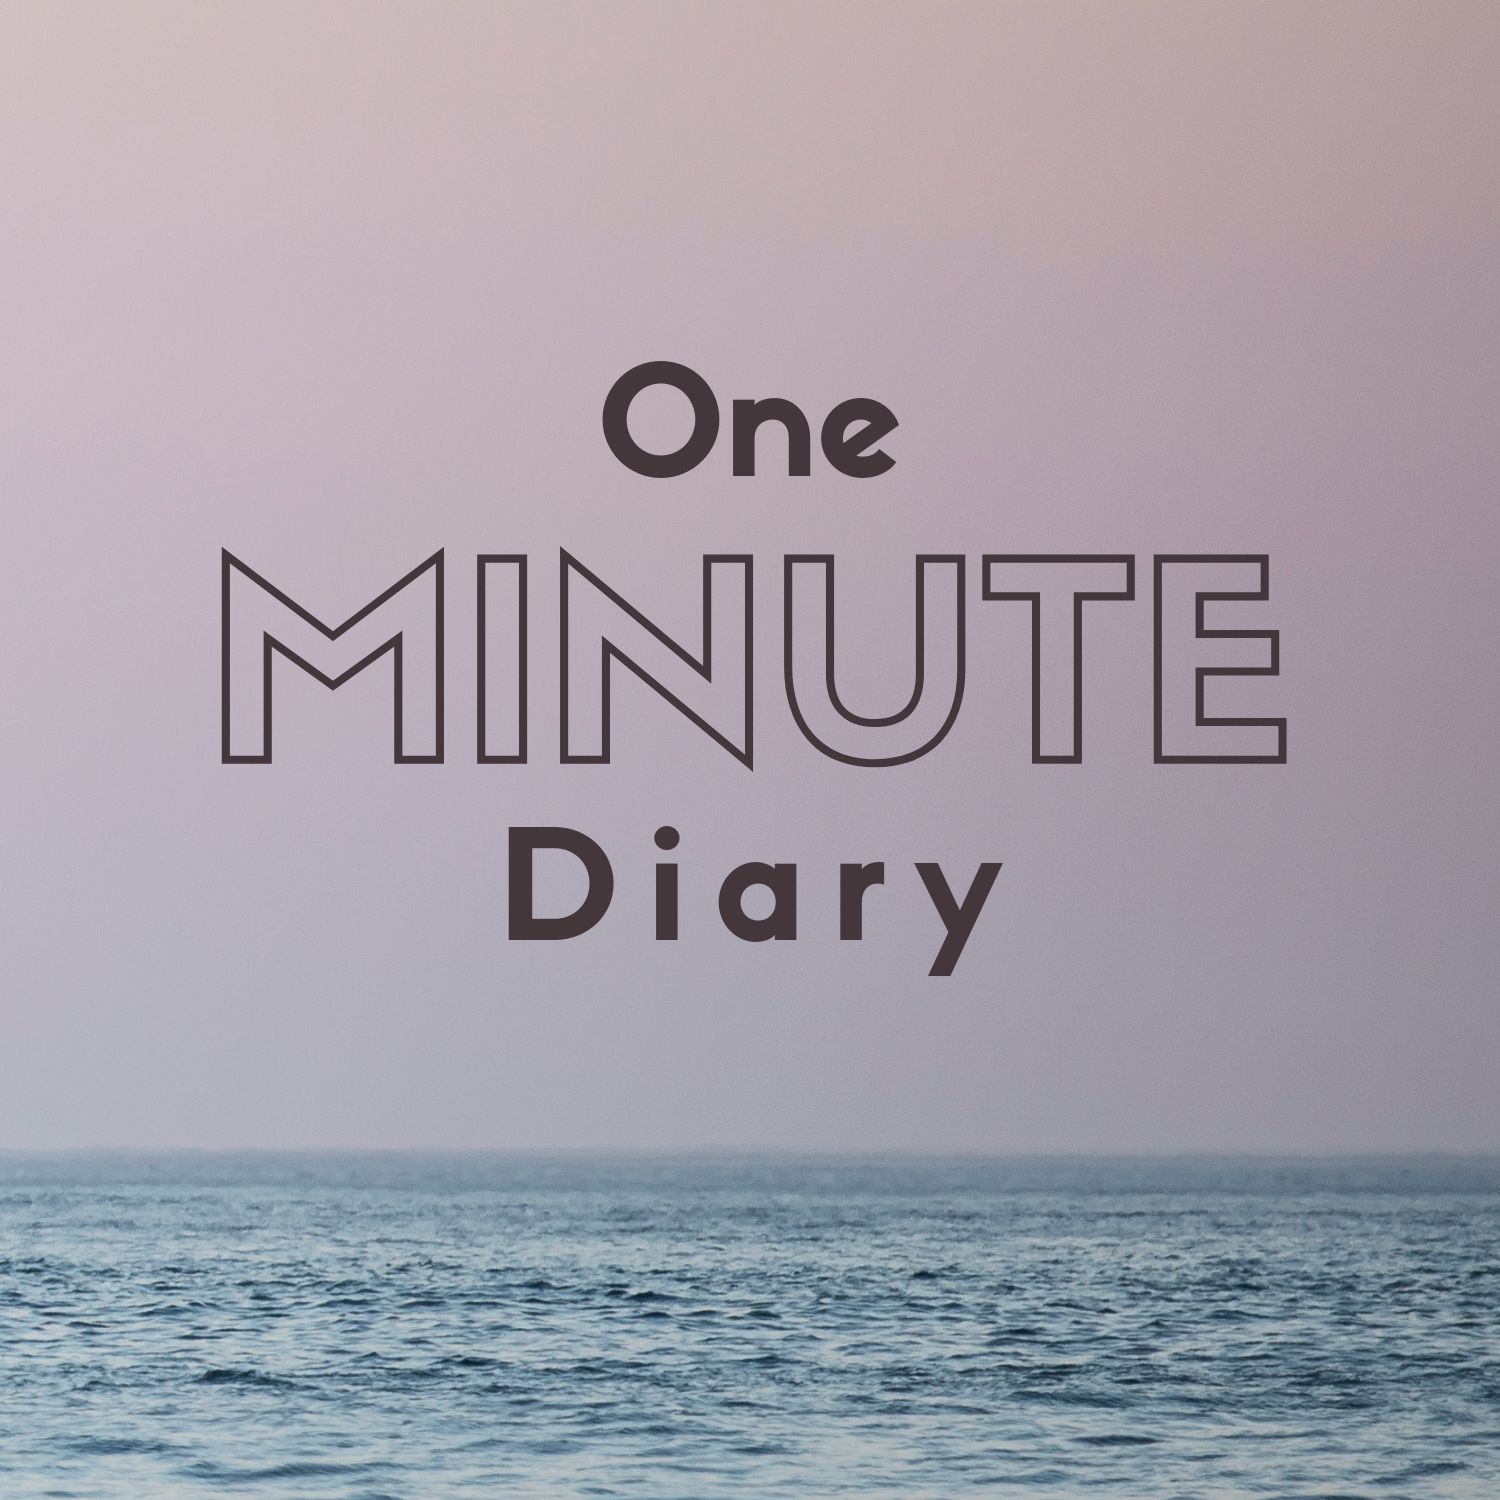 One Minute Diary